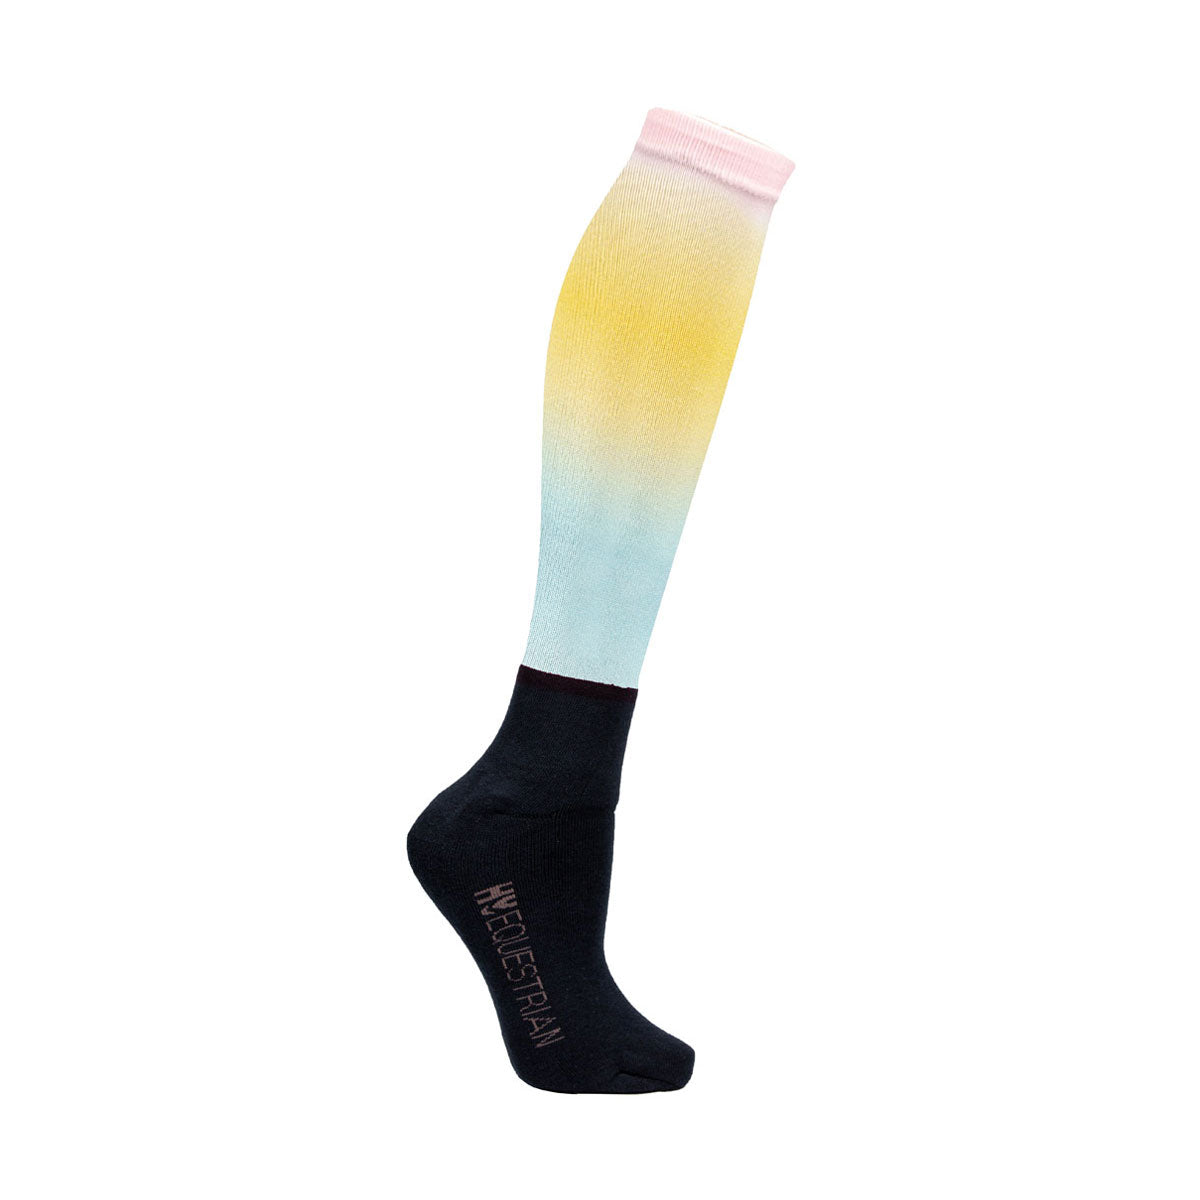 Hy Equestrian Childrens Ombre Socks (Pack of 3)